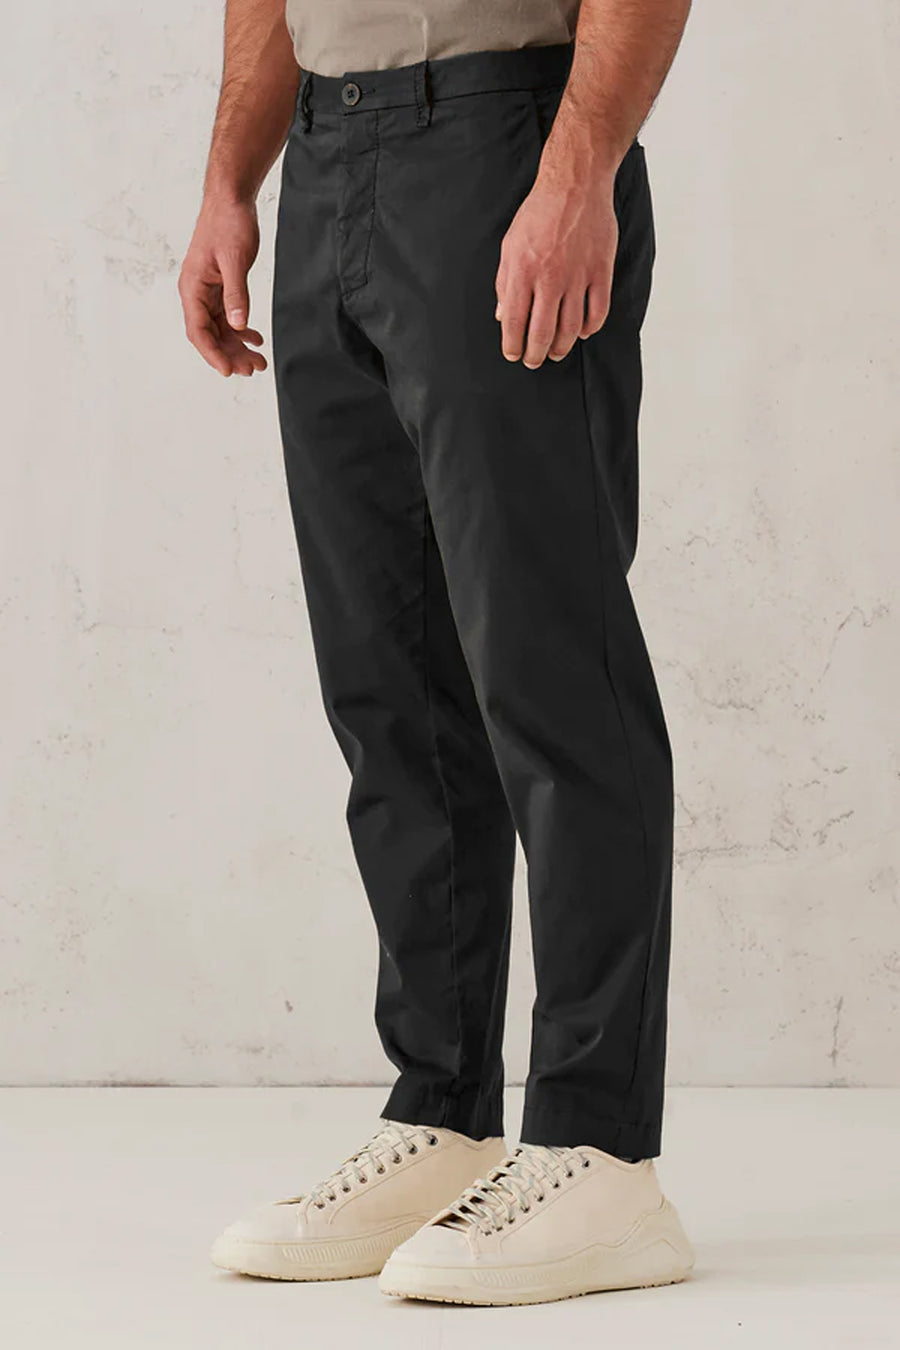 Buy the Transit Italian Satin/Cotton Trouser in Black at Intro. Spend £50 for free UK delivery. Official stockists. We ship worldwide.